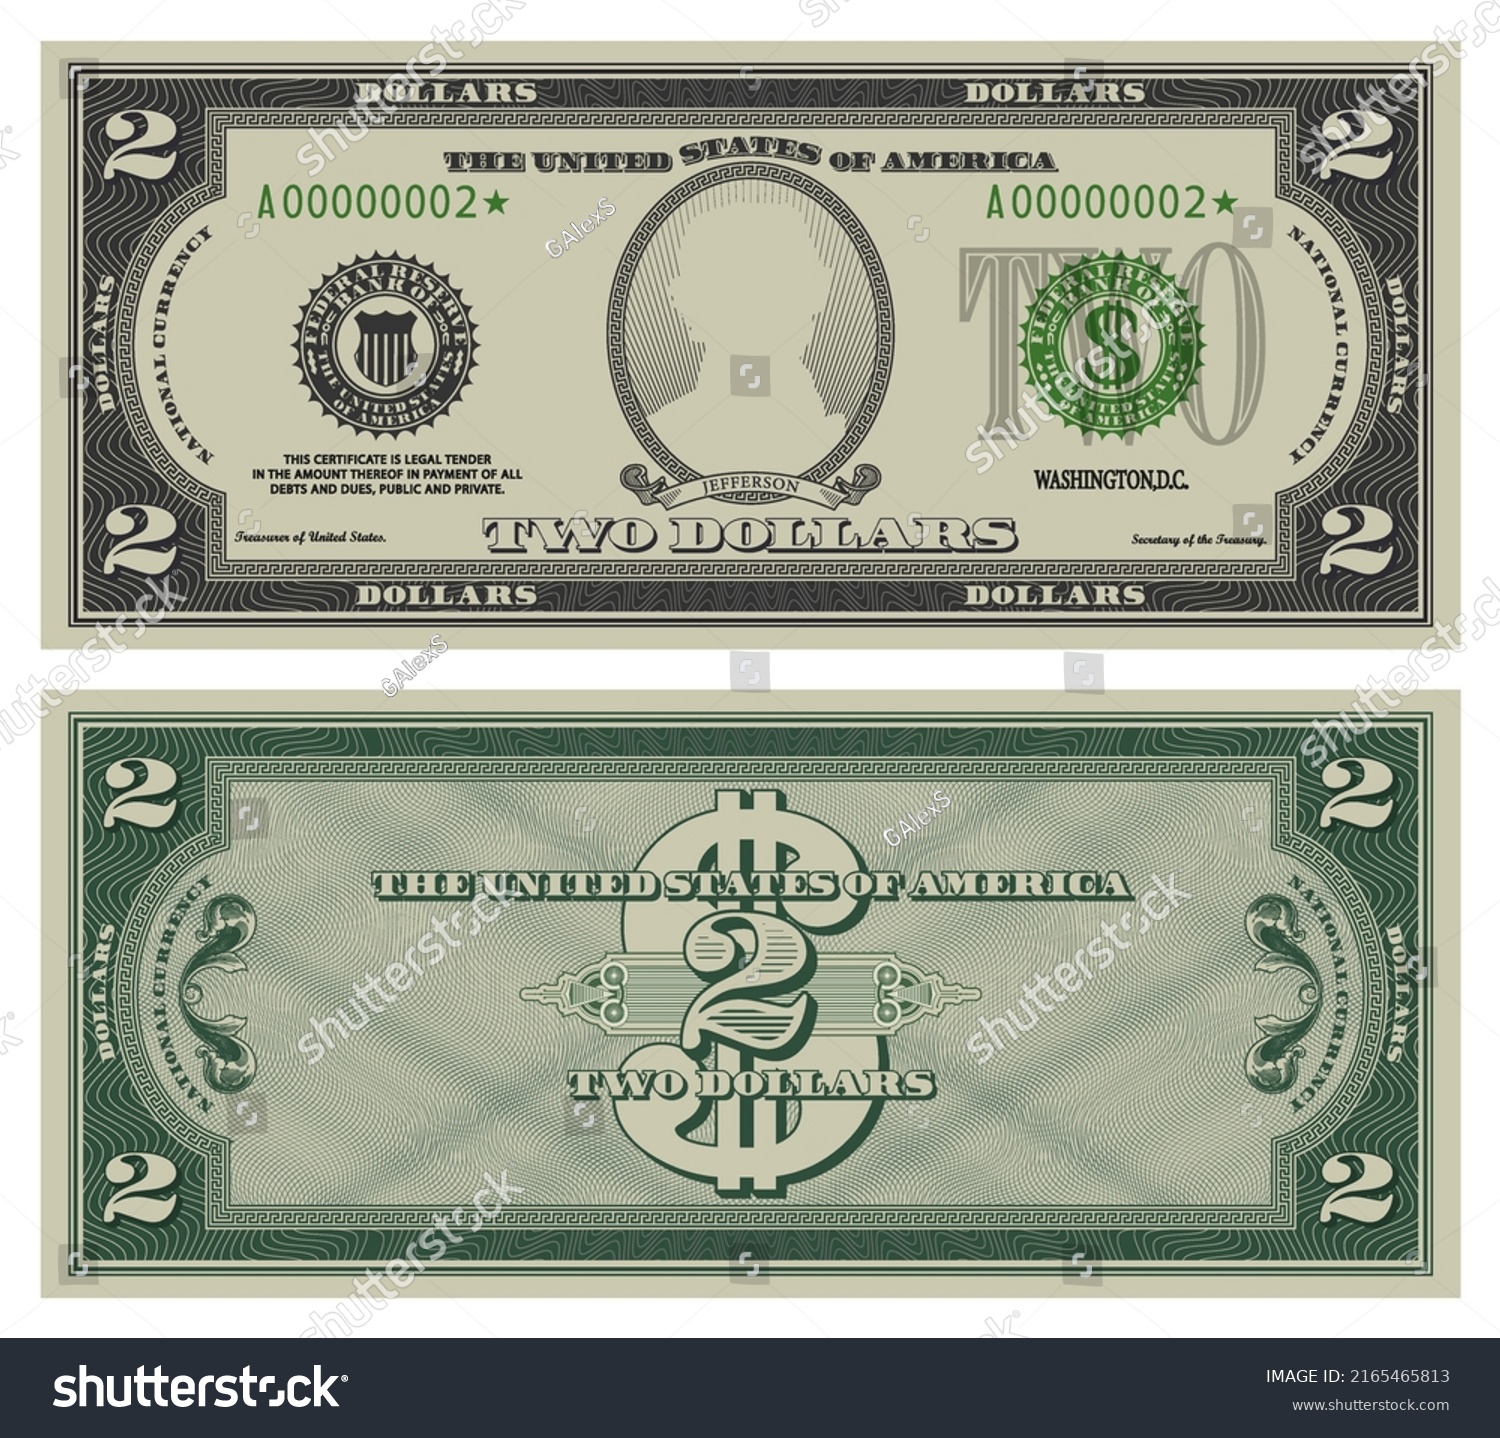 SVG of Two dollars banknote. Gray obverse and green reverse fictional US paper money in style of vintage american cash. Frame with guilloche mesh and bank seals. Jefferson svg